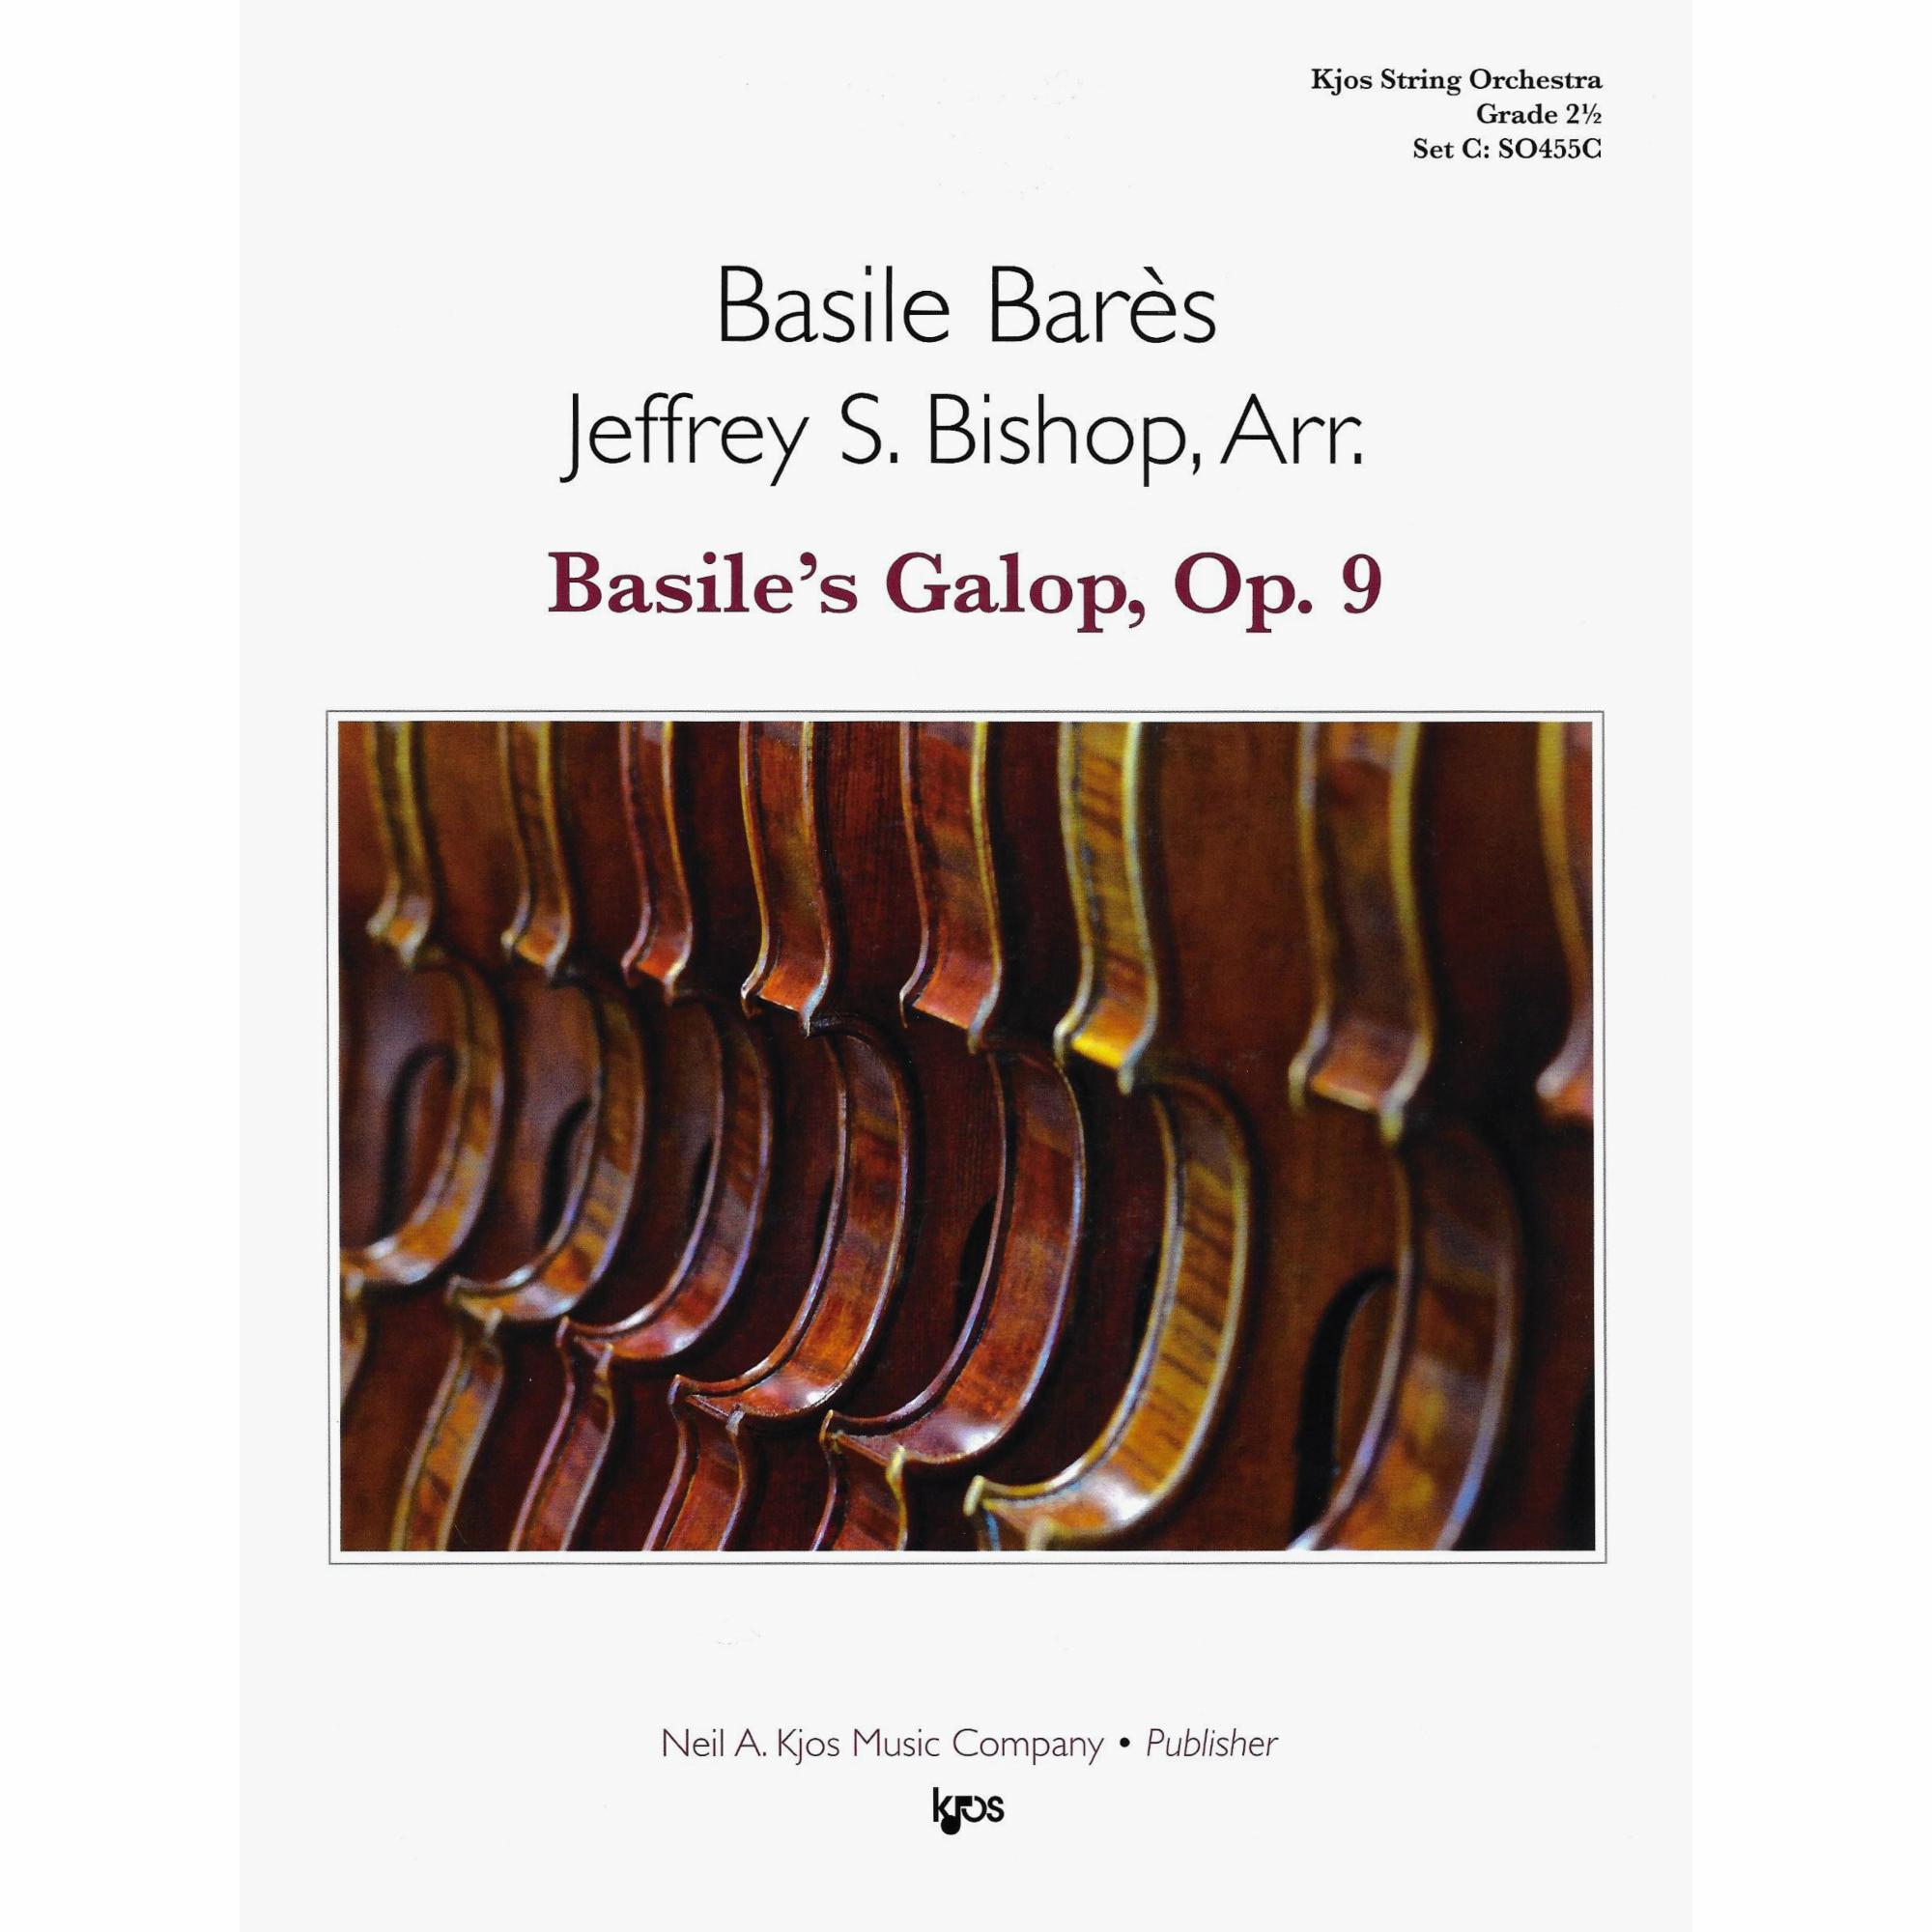 Basile's Galop, Op. 9 for String Orchestra